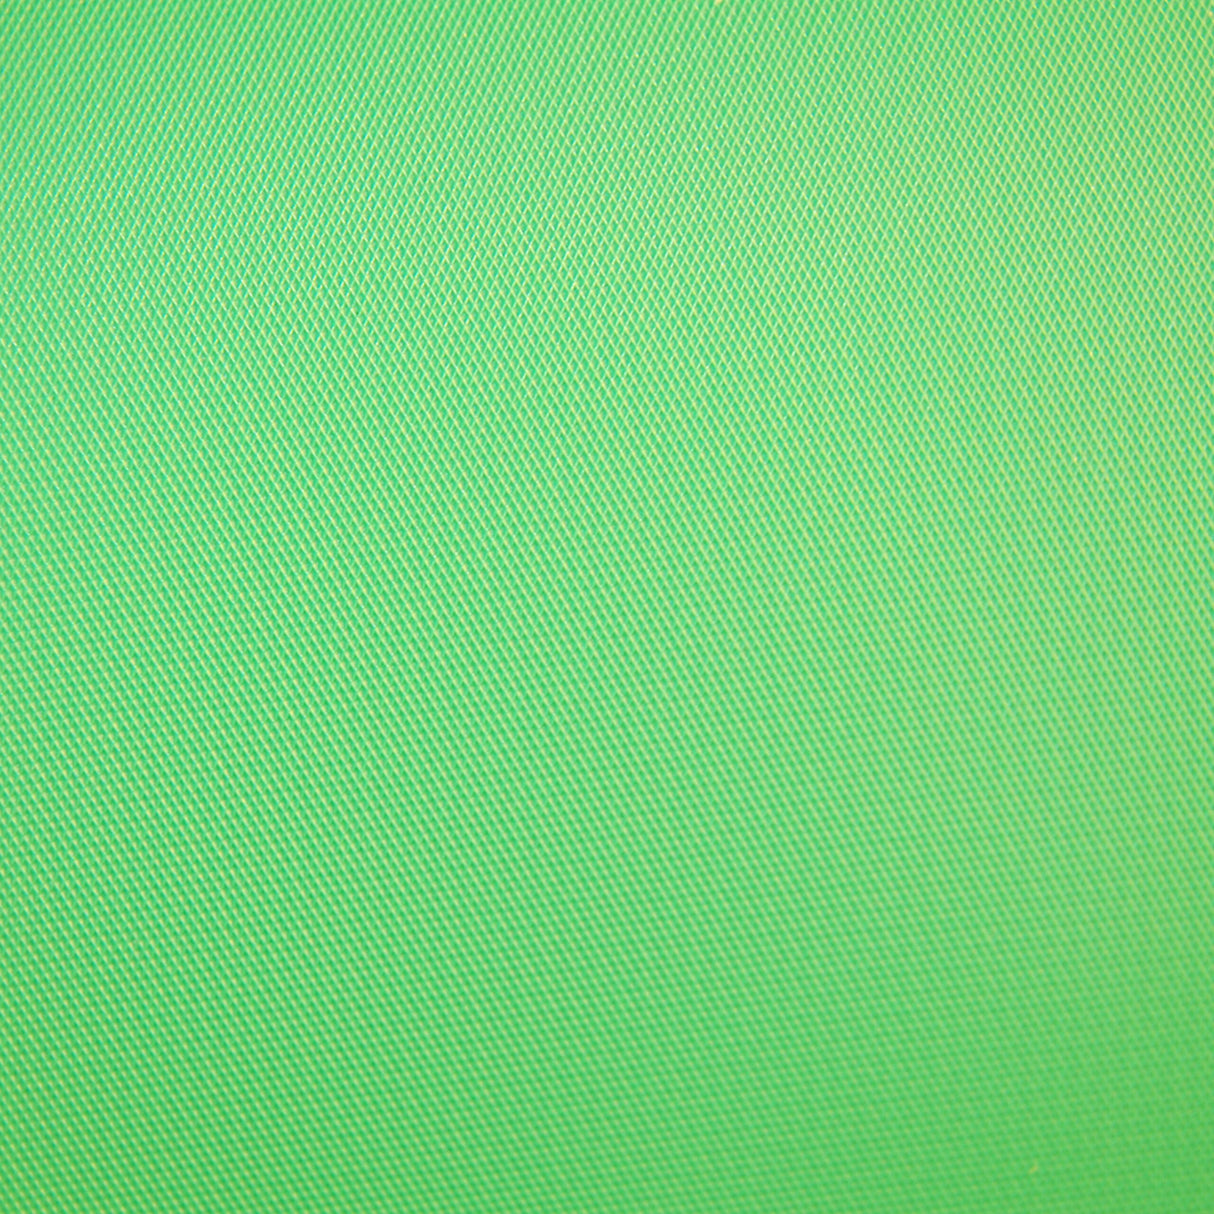 Savage 10 x 10-Foot Solid Vinyl Backdrop Background, Chroma Green